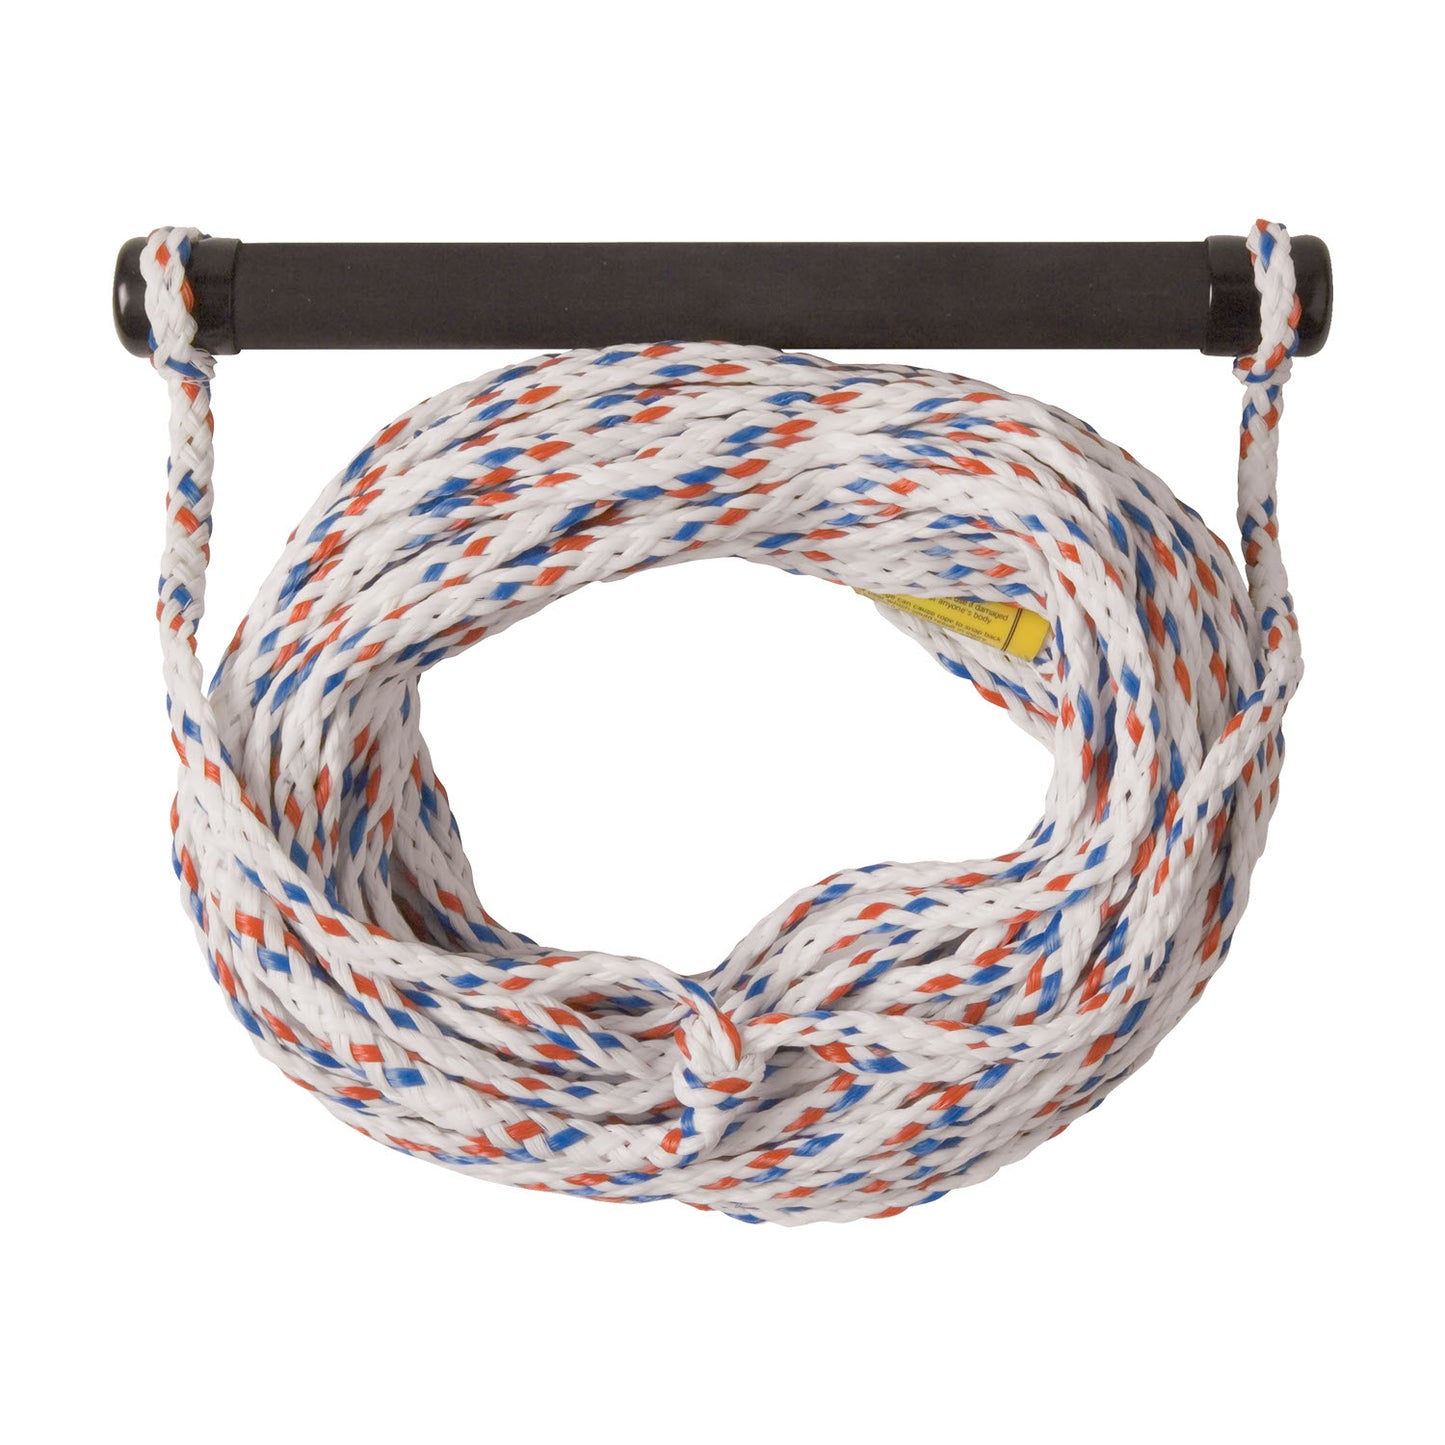 75FT UNIVERSAL WATER SPORTS ROPE